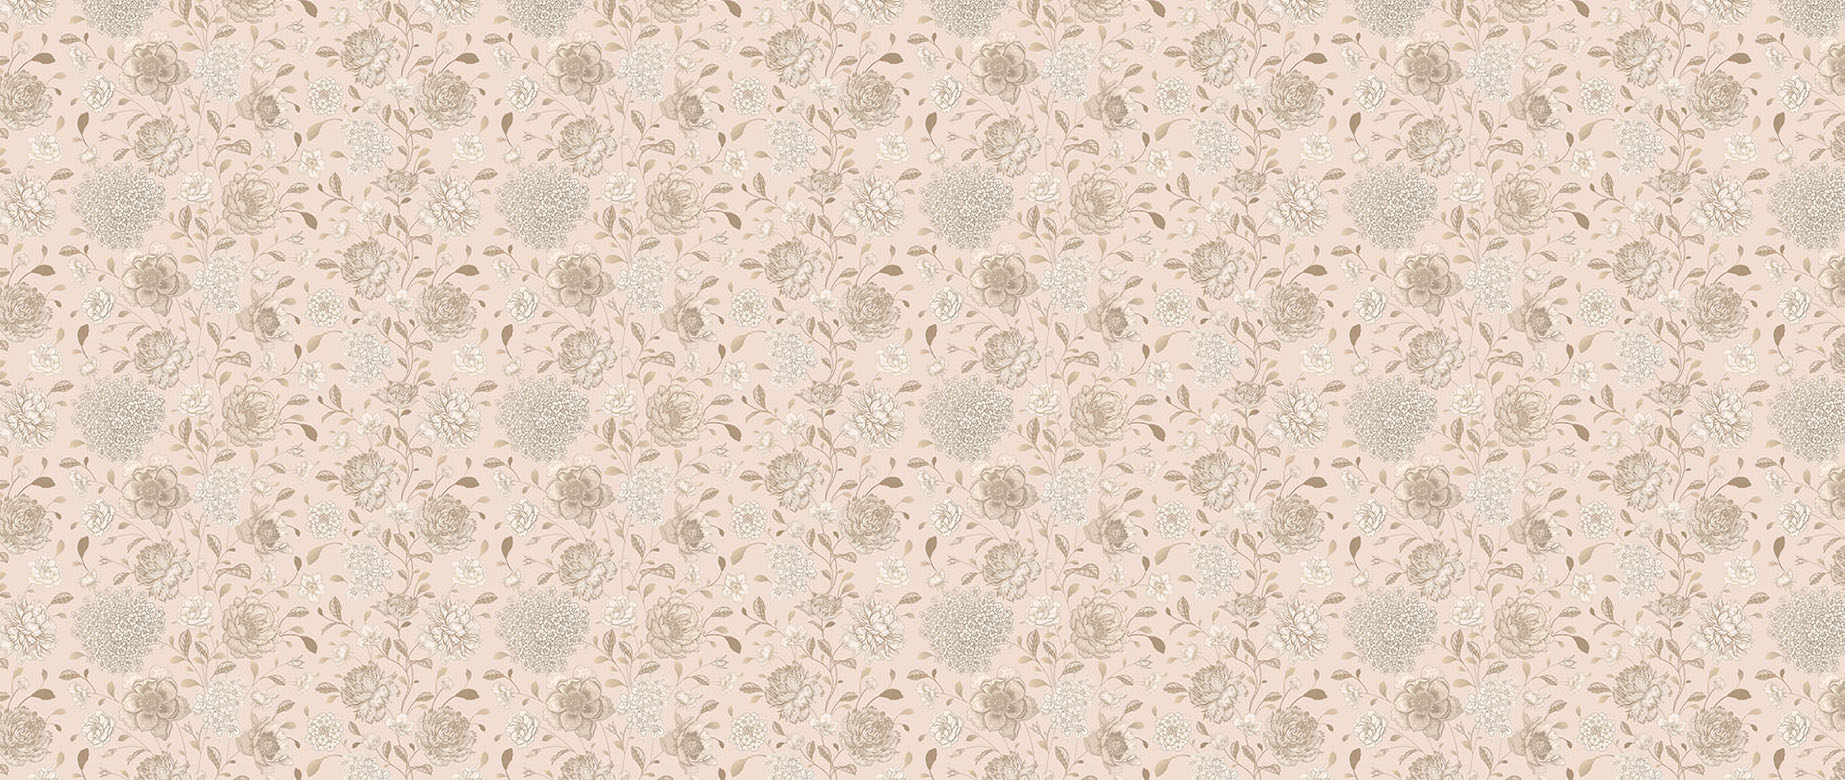 bunch-of-flowers-and-leaves-wallpaper-seamless-repeat-view